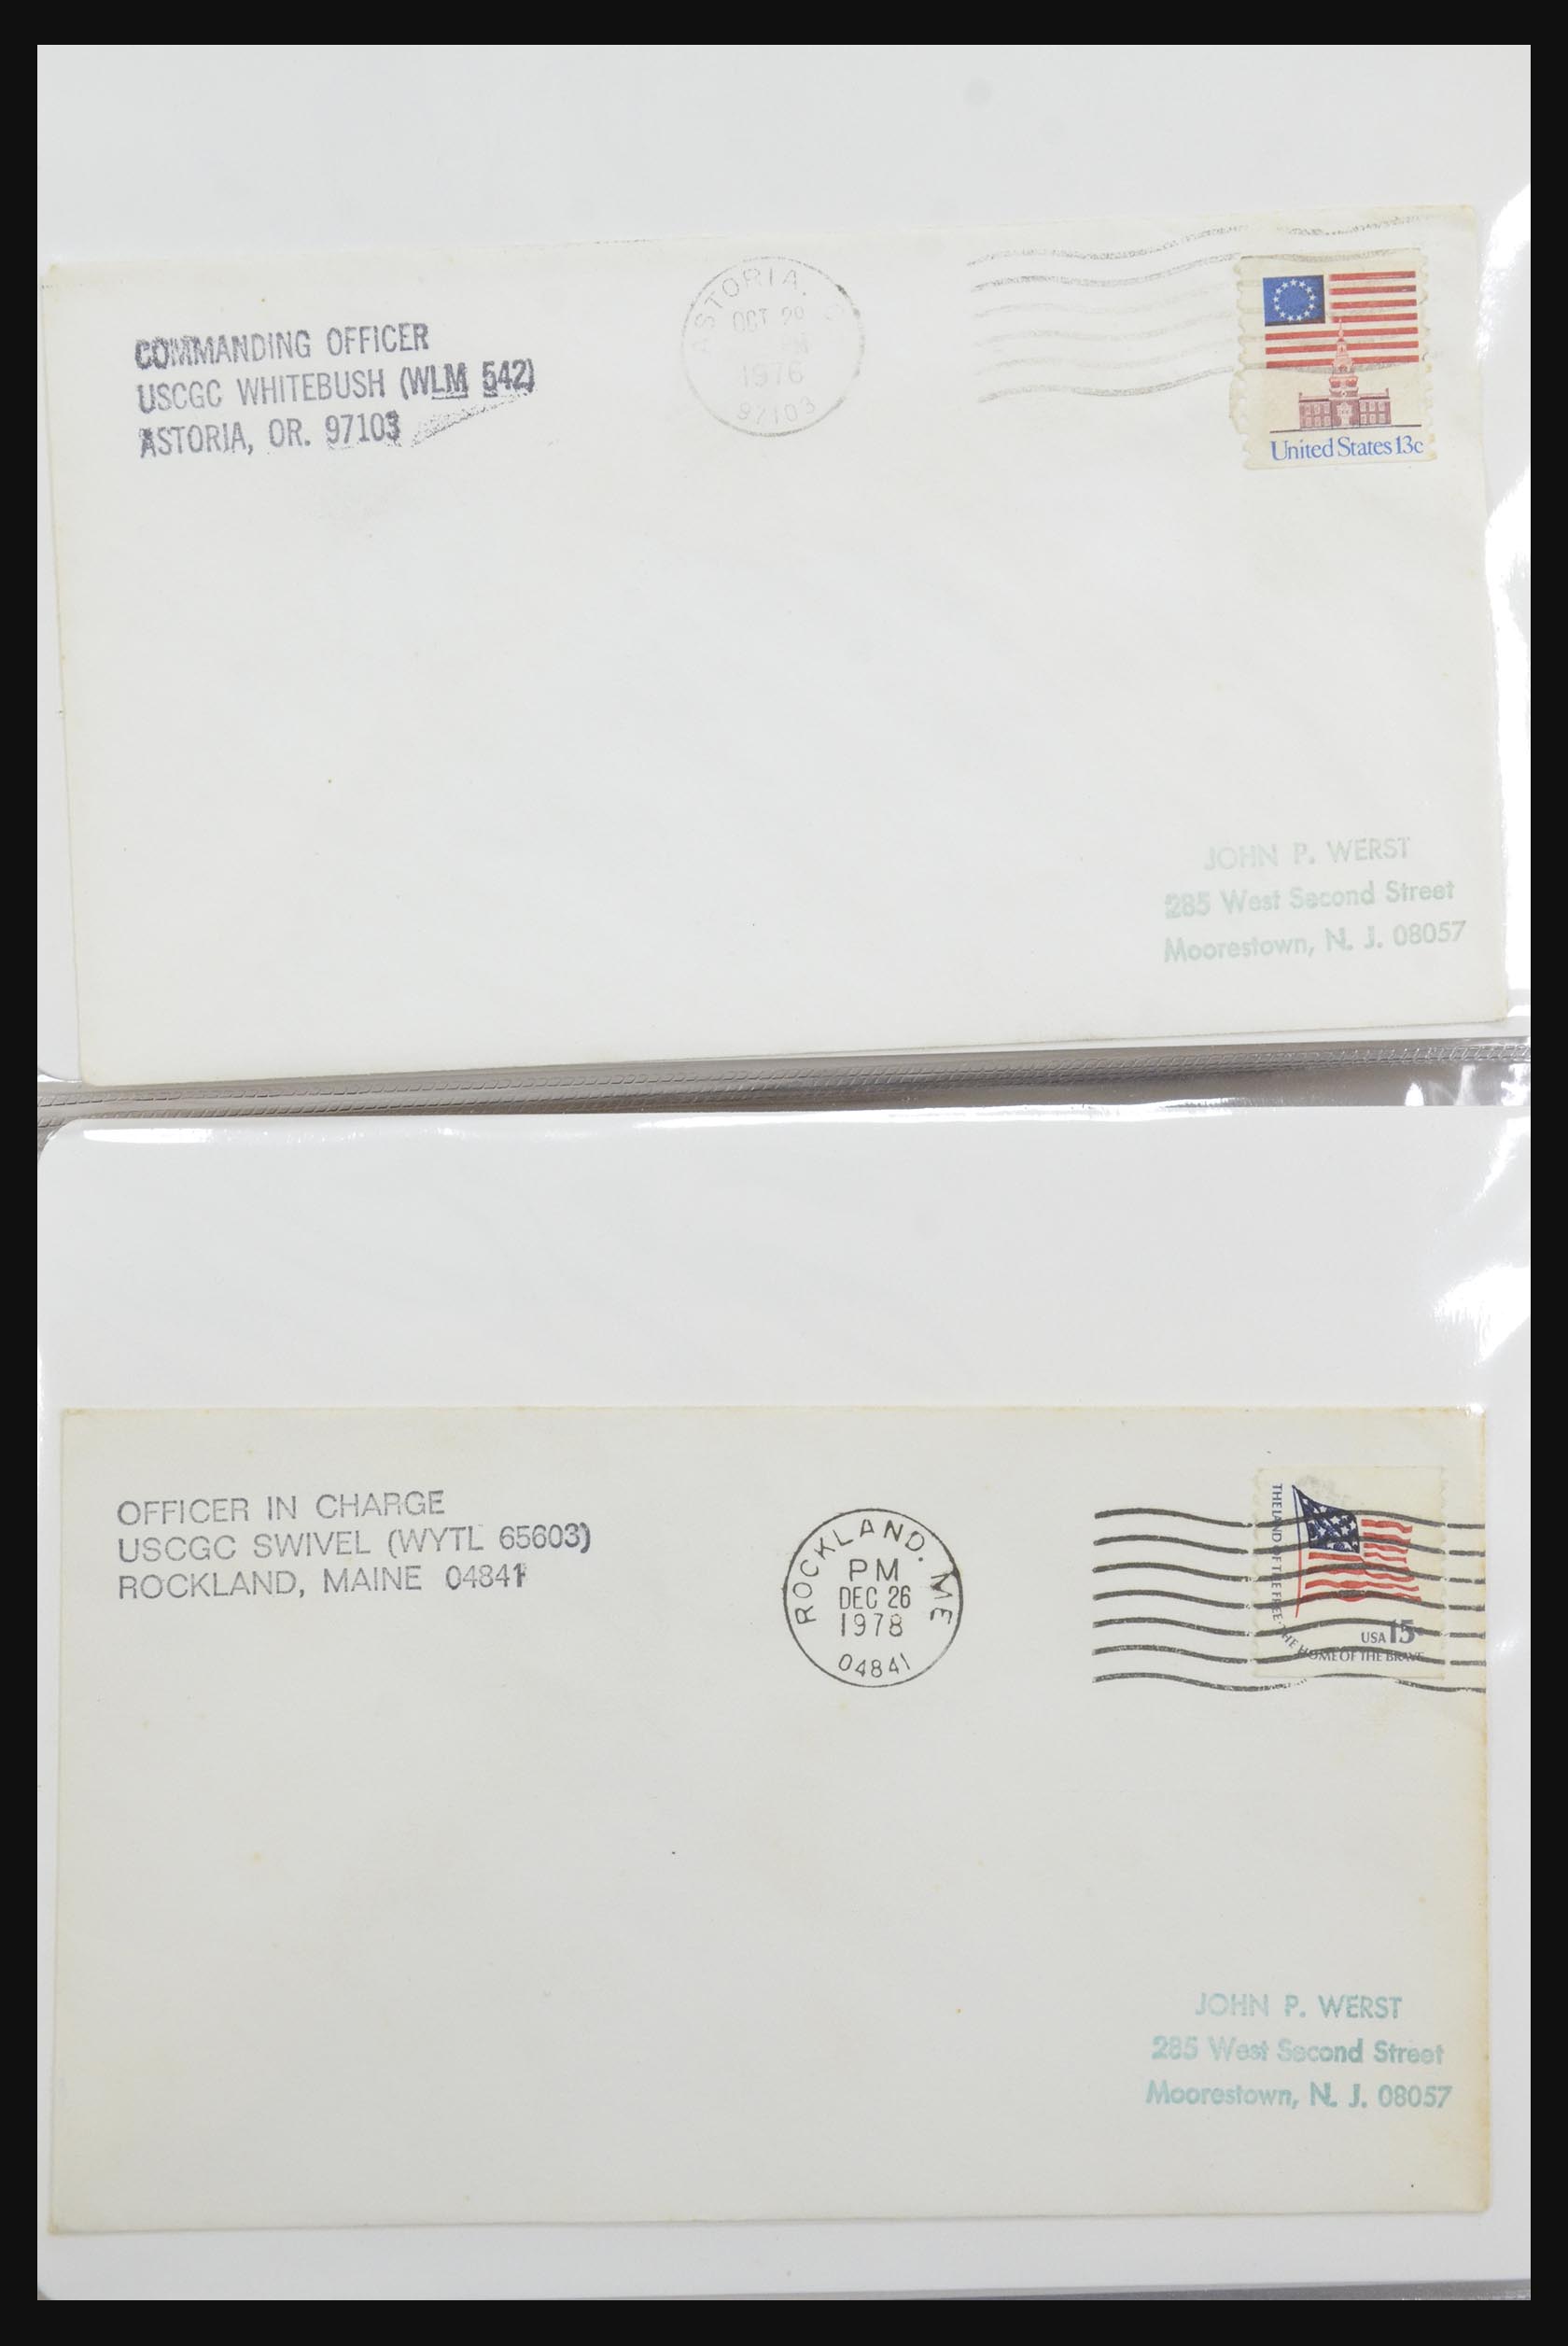 31728 024 - 31728 USA covers and FDC's 1880-1980.